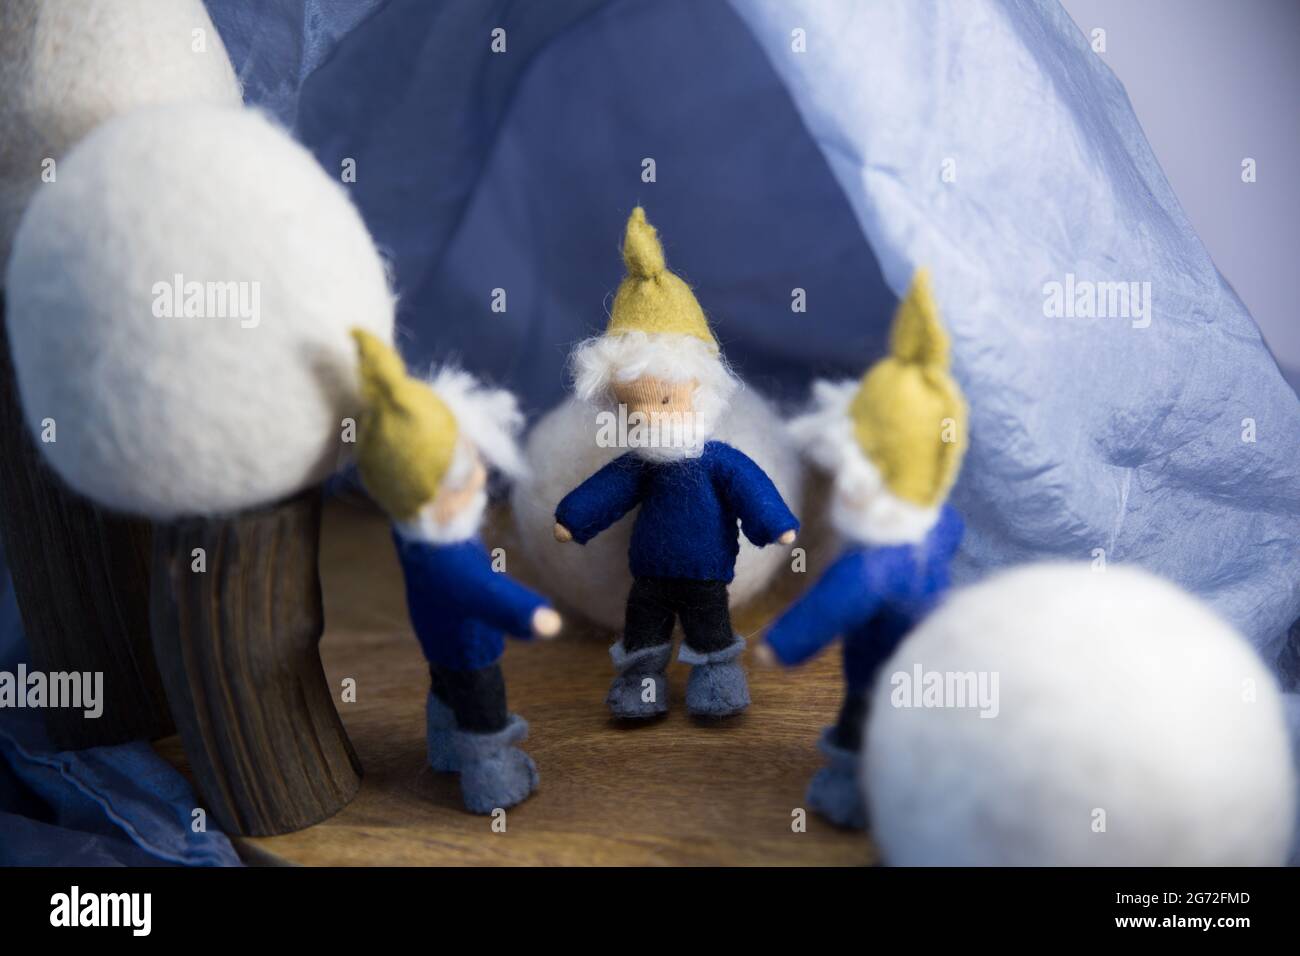 Three knitted fictional characters - dwarves dressed in blue by fluffy white balls in the scene Stock Photo